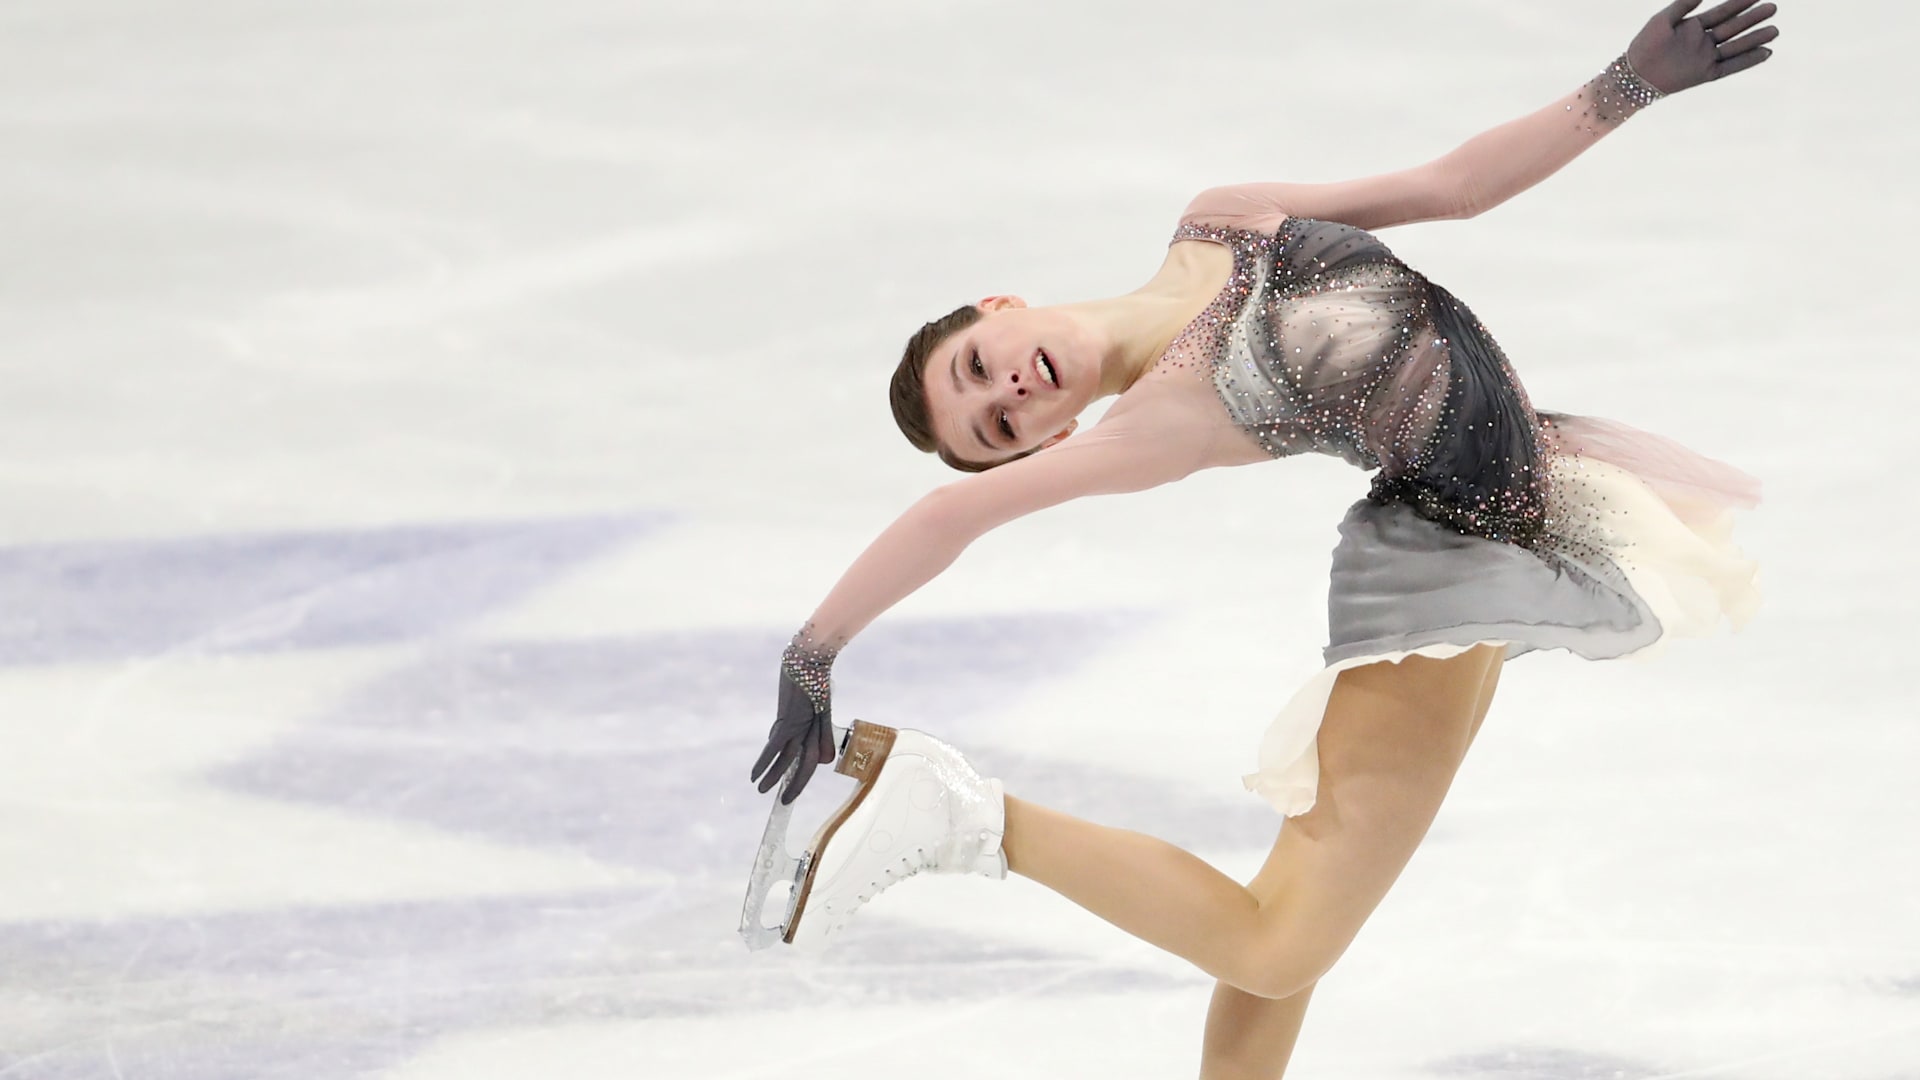 Nathan Chen, Anna Shcherbakova and other takeaways from figure skating world championships